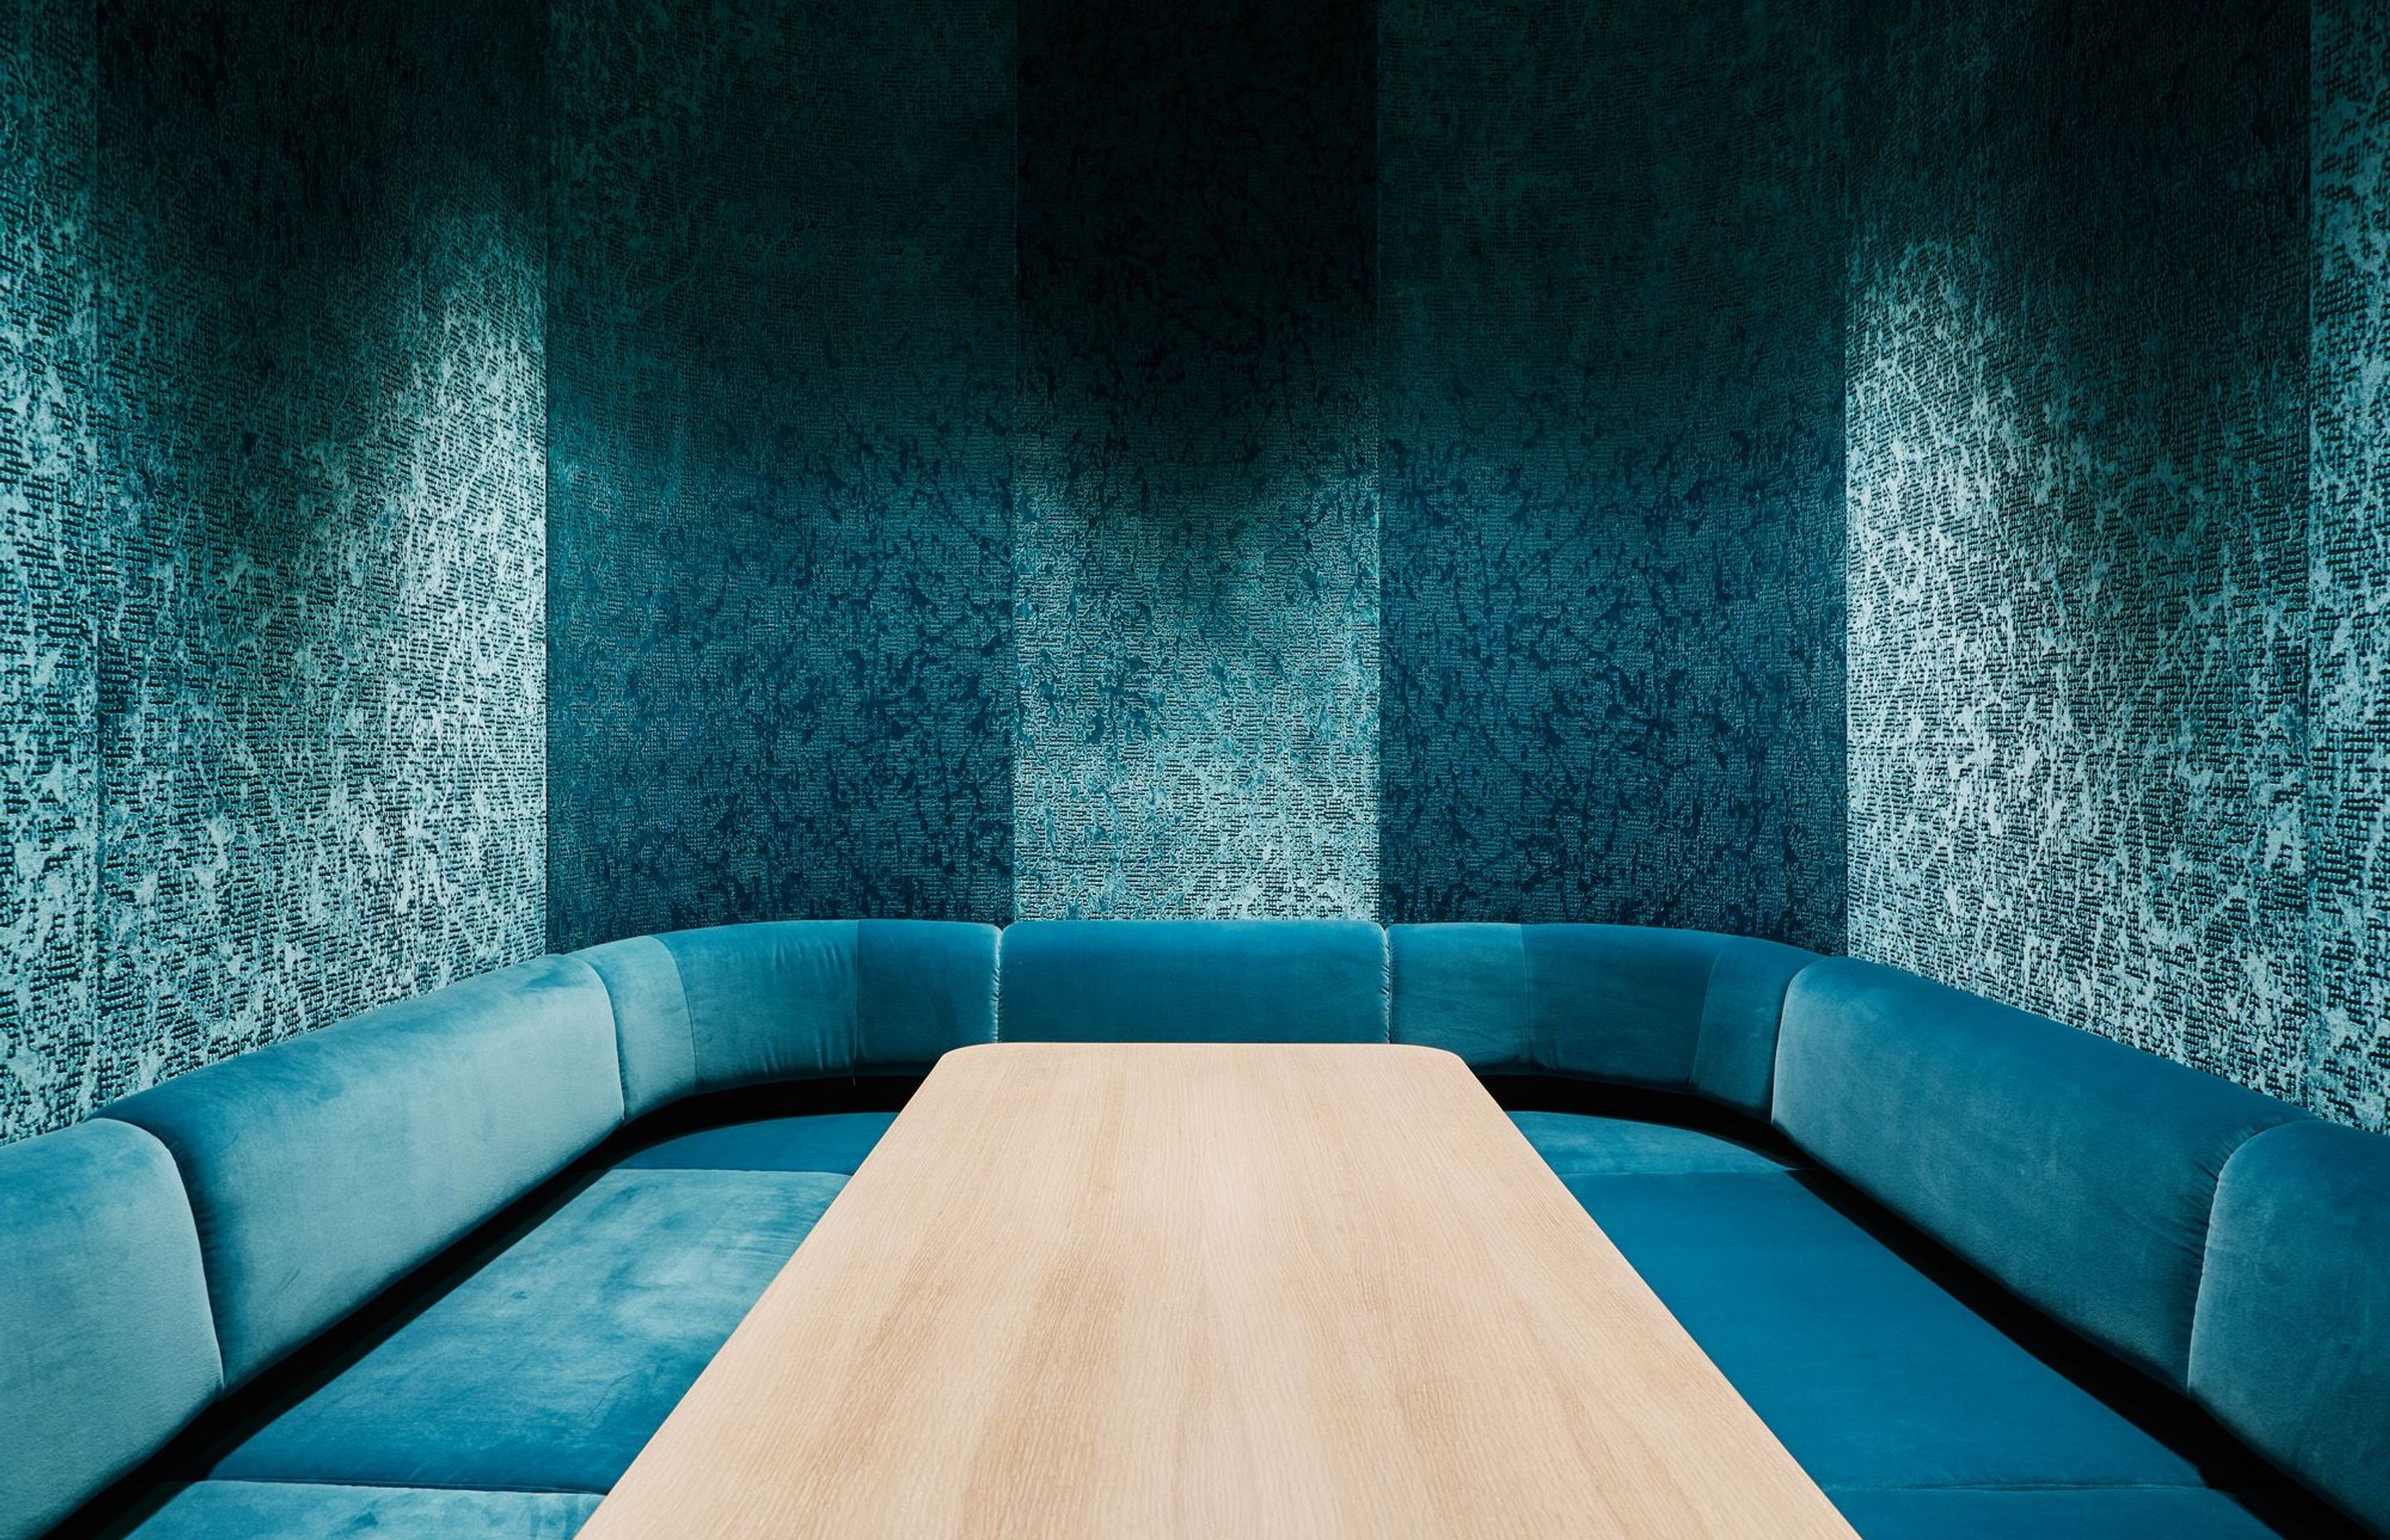 Inside the internal pod is an informal meeting booth lined with plush teal-blue seating.